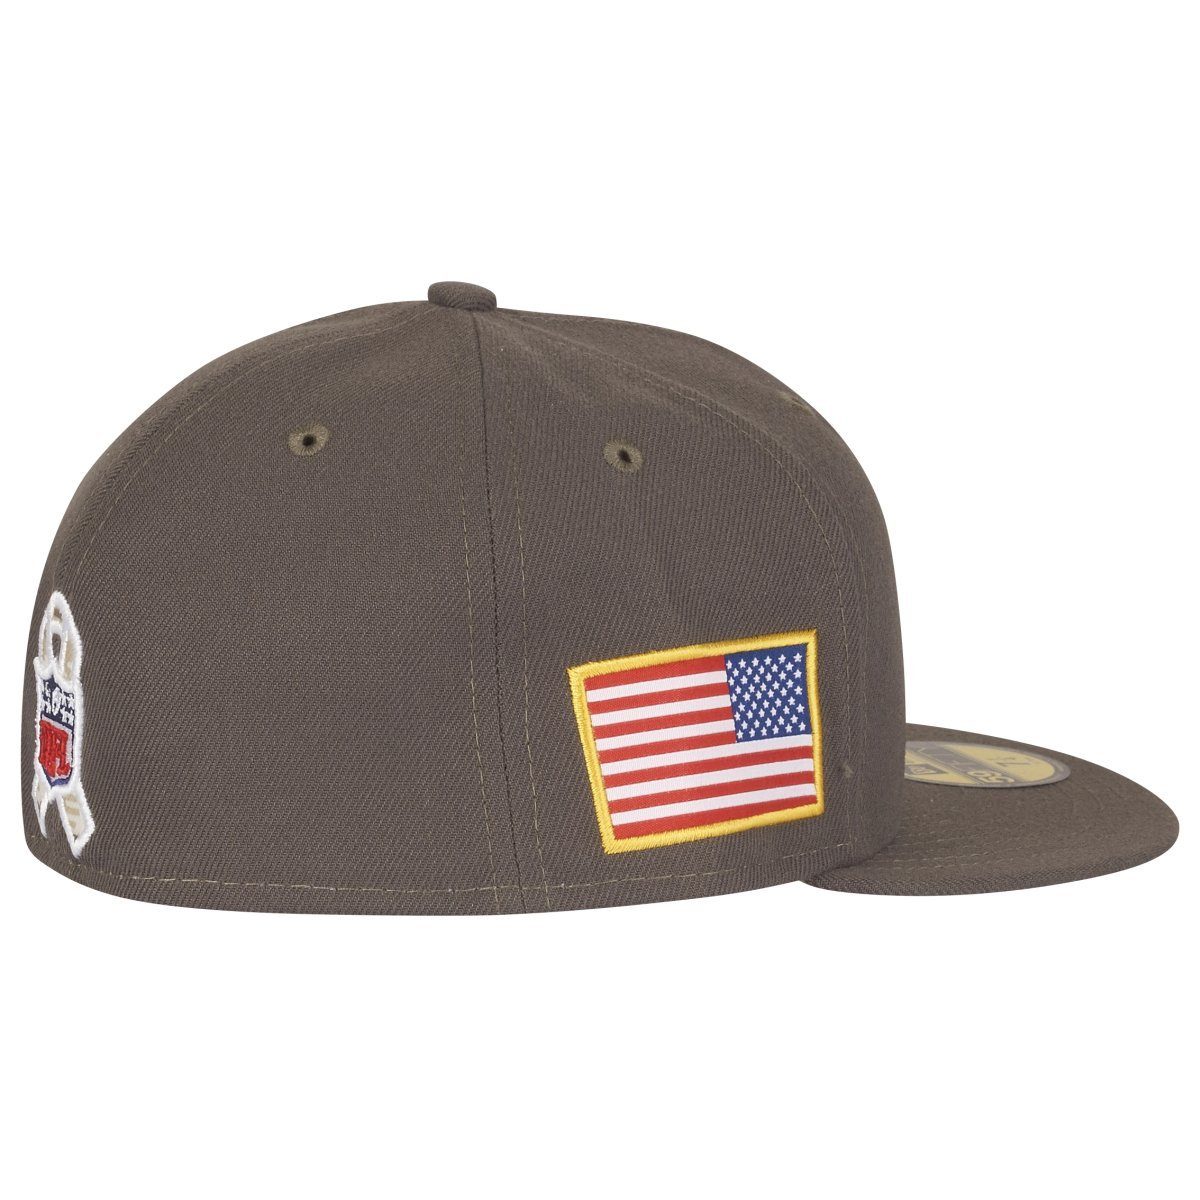 Service Era Salute New Cap Steelers 59Fifty Fitted to Pittsburgh